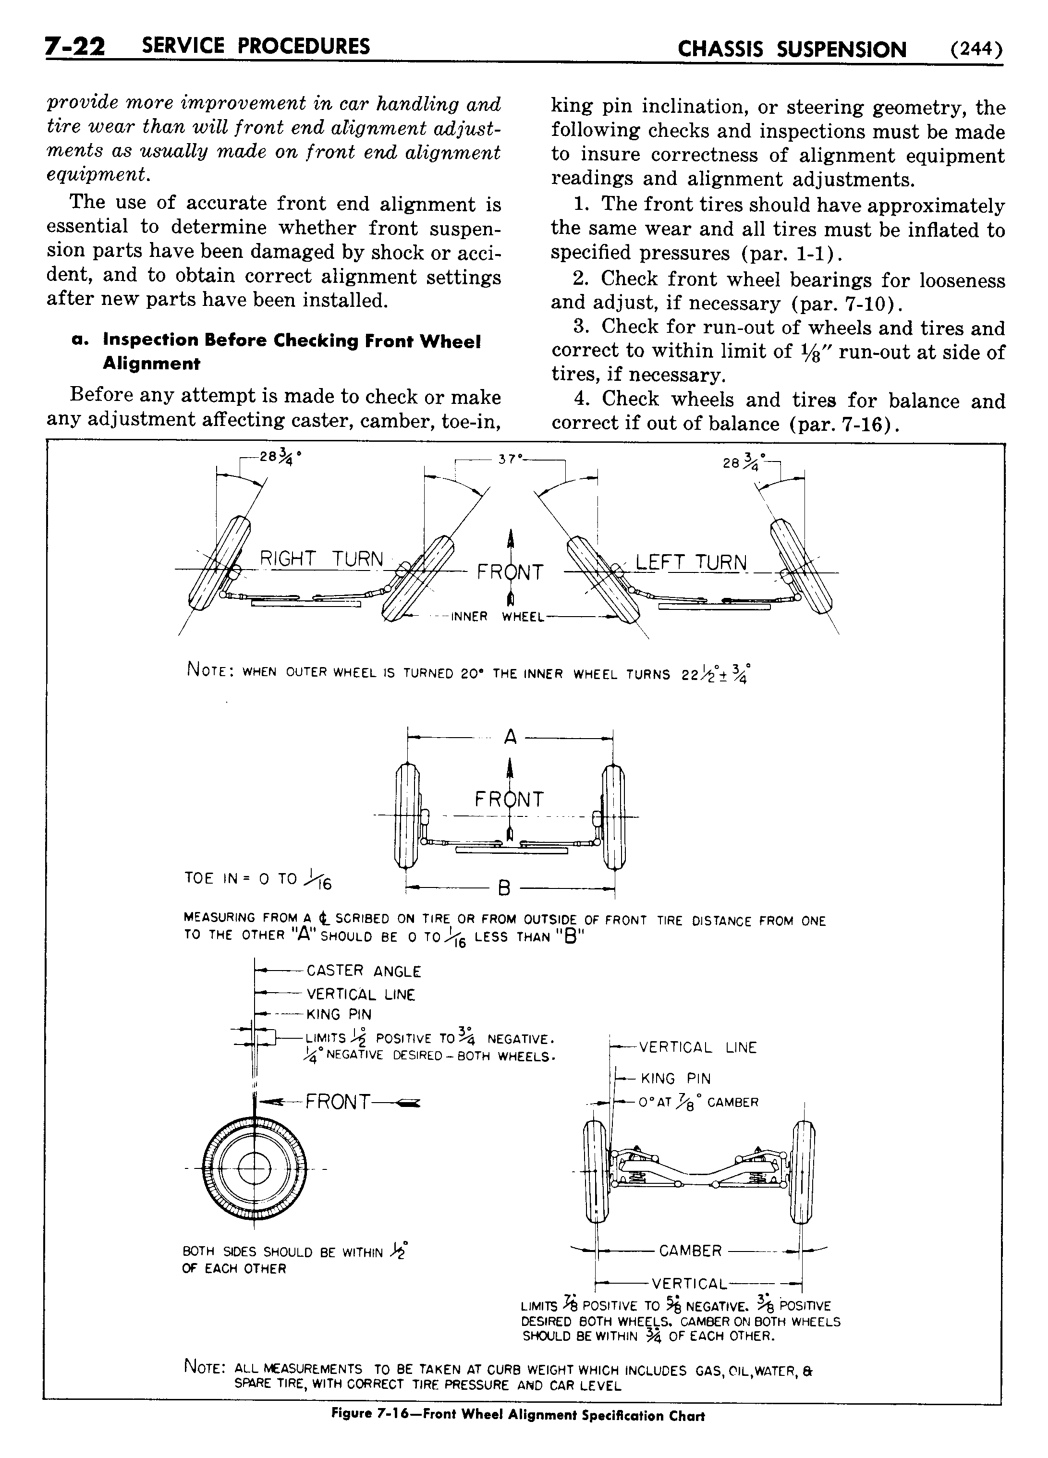 n_08 1955 Buick Shop Manual - Chassis Suspension-022-022.jpg